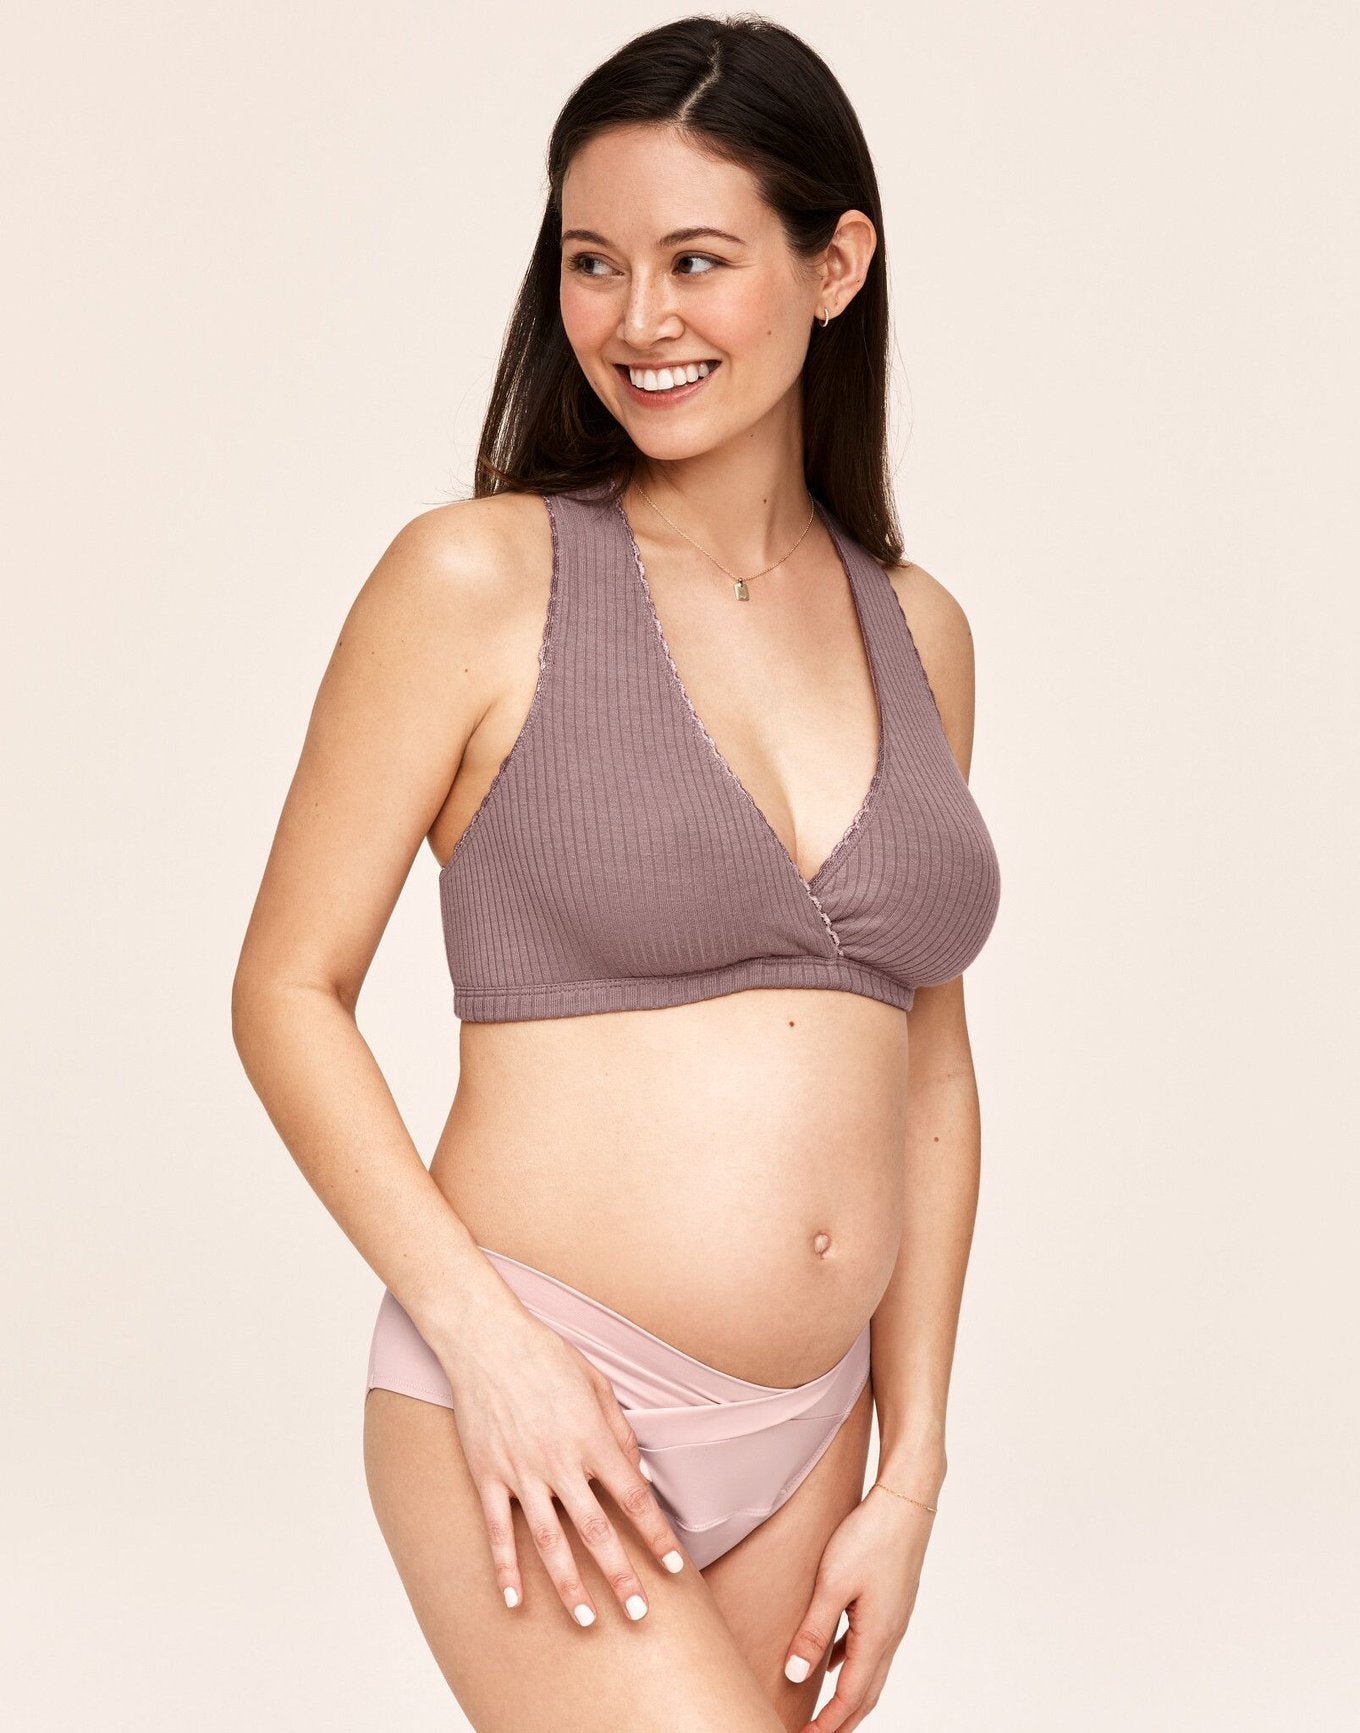 Why postpartum mamas should only wear light-colored underwear